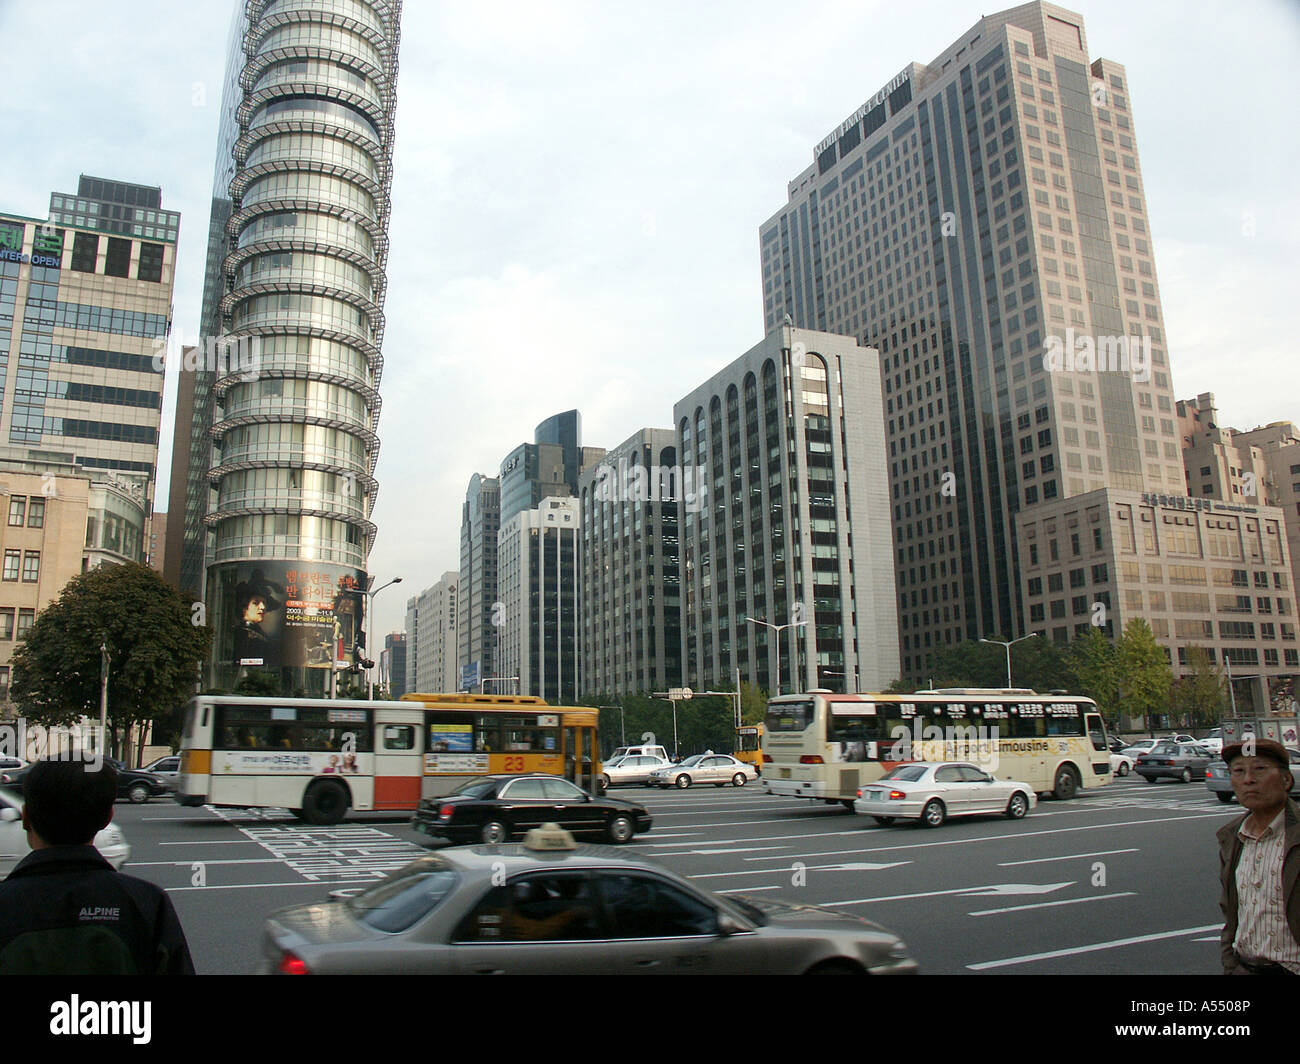 Painet ip2258 korea downtown soeul 2003 country developing nation less economically developed culture emerging market Stock Photo